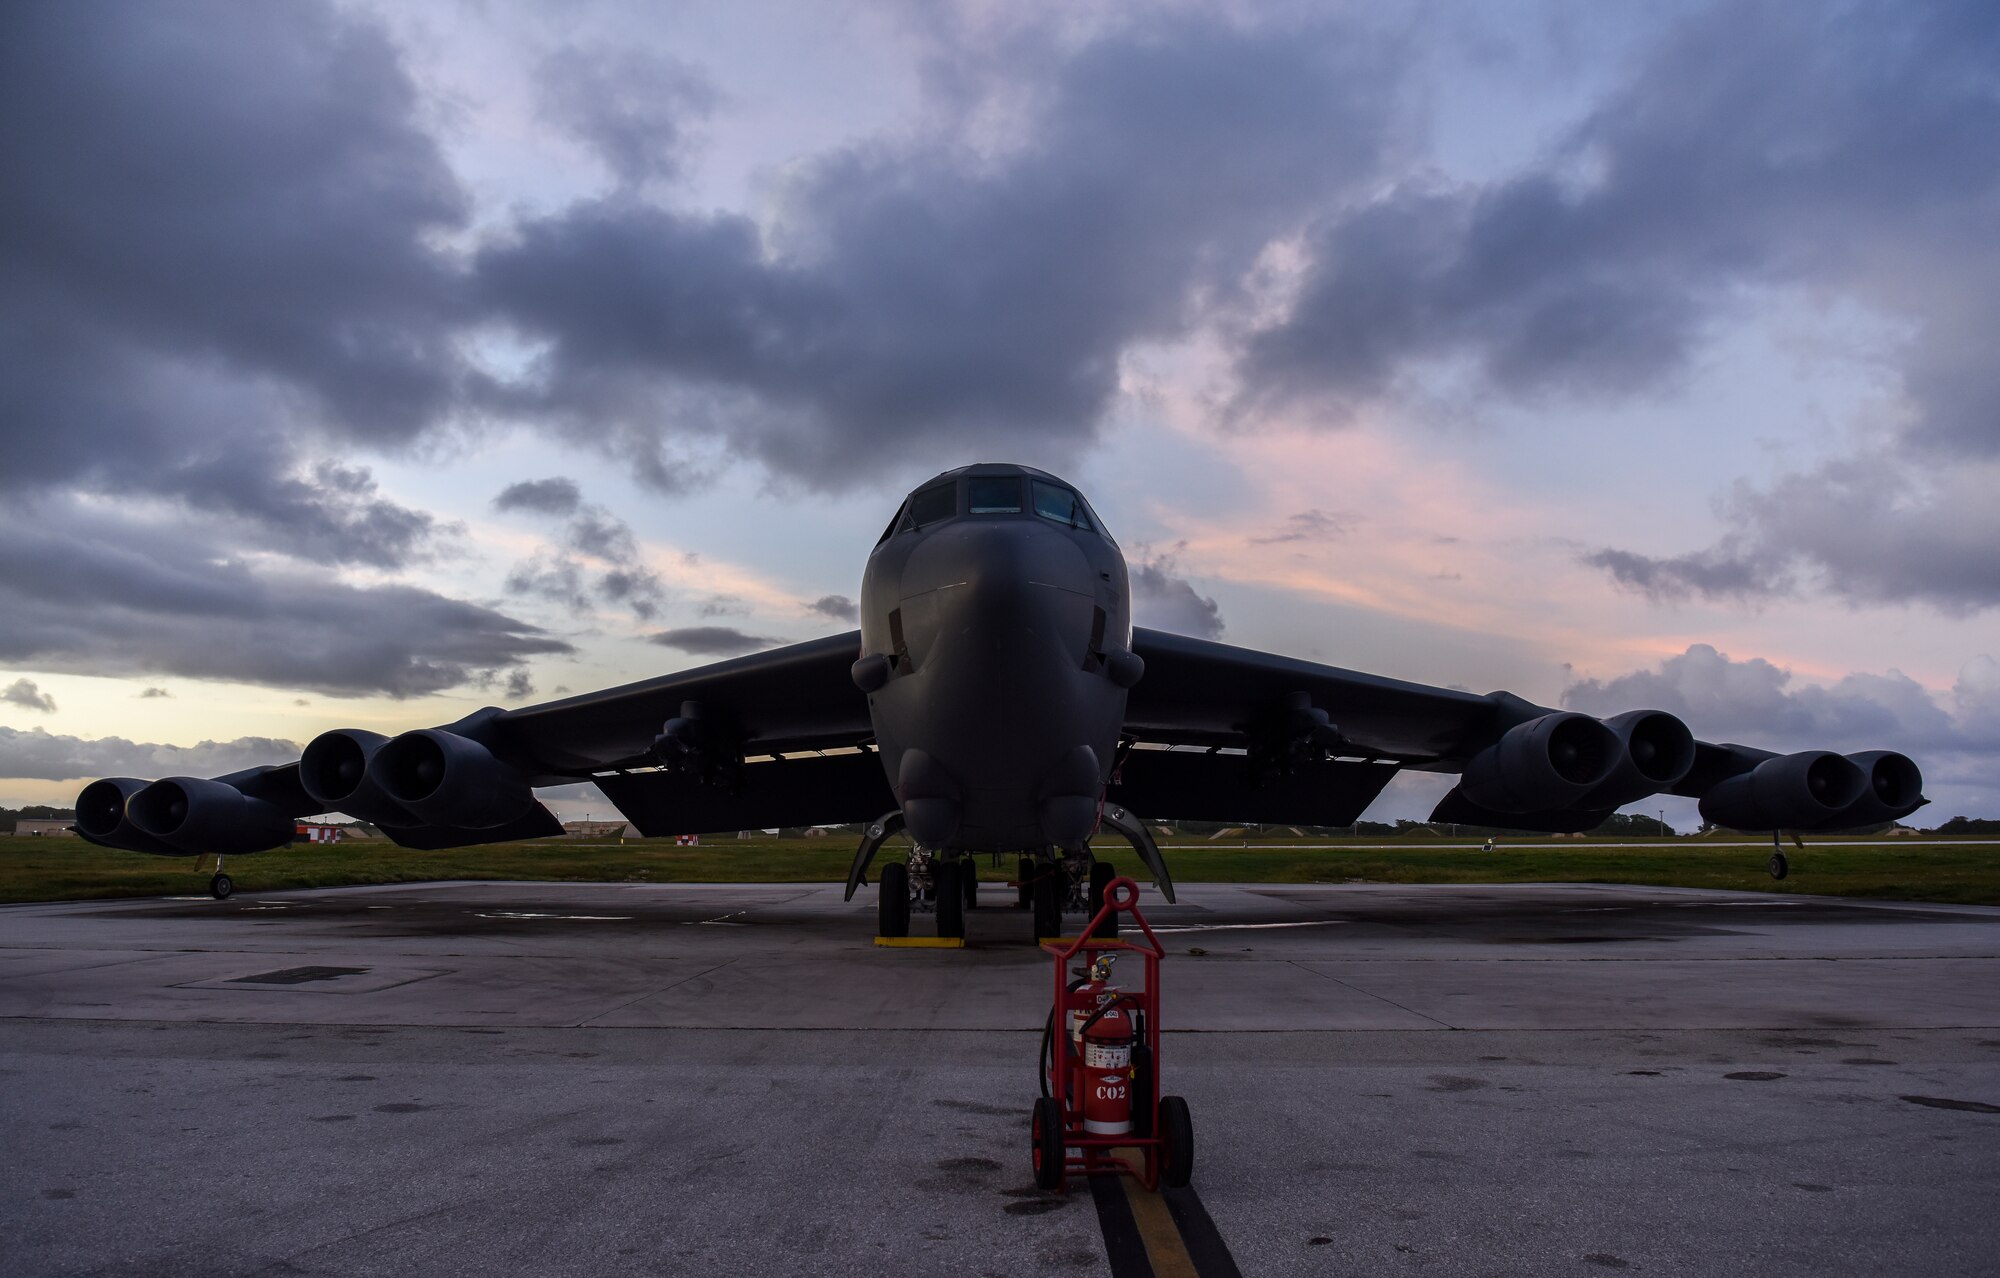 A B-52 Stratofortress bomber from the 5th Bomb Wing at Minot Air Force Base (AFB), North Dakota, sits on the flightline at Andersen AFB, Guam, Jan. 15, 2019.